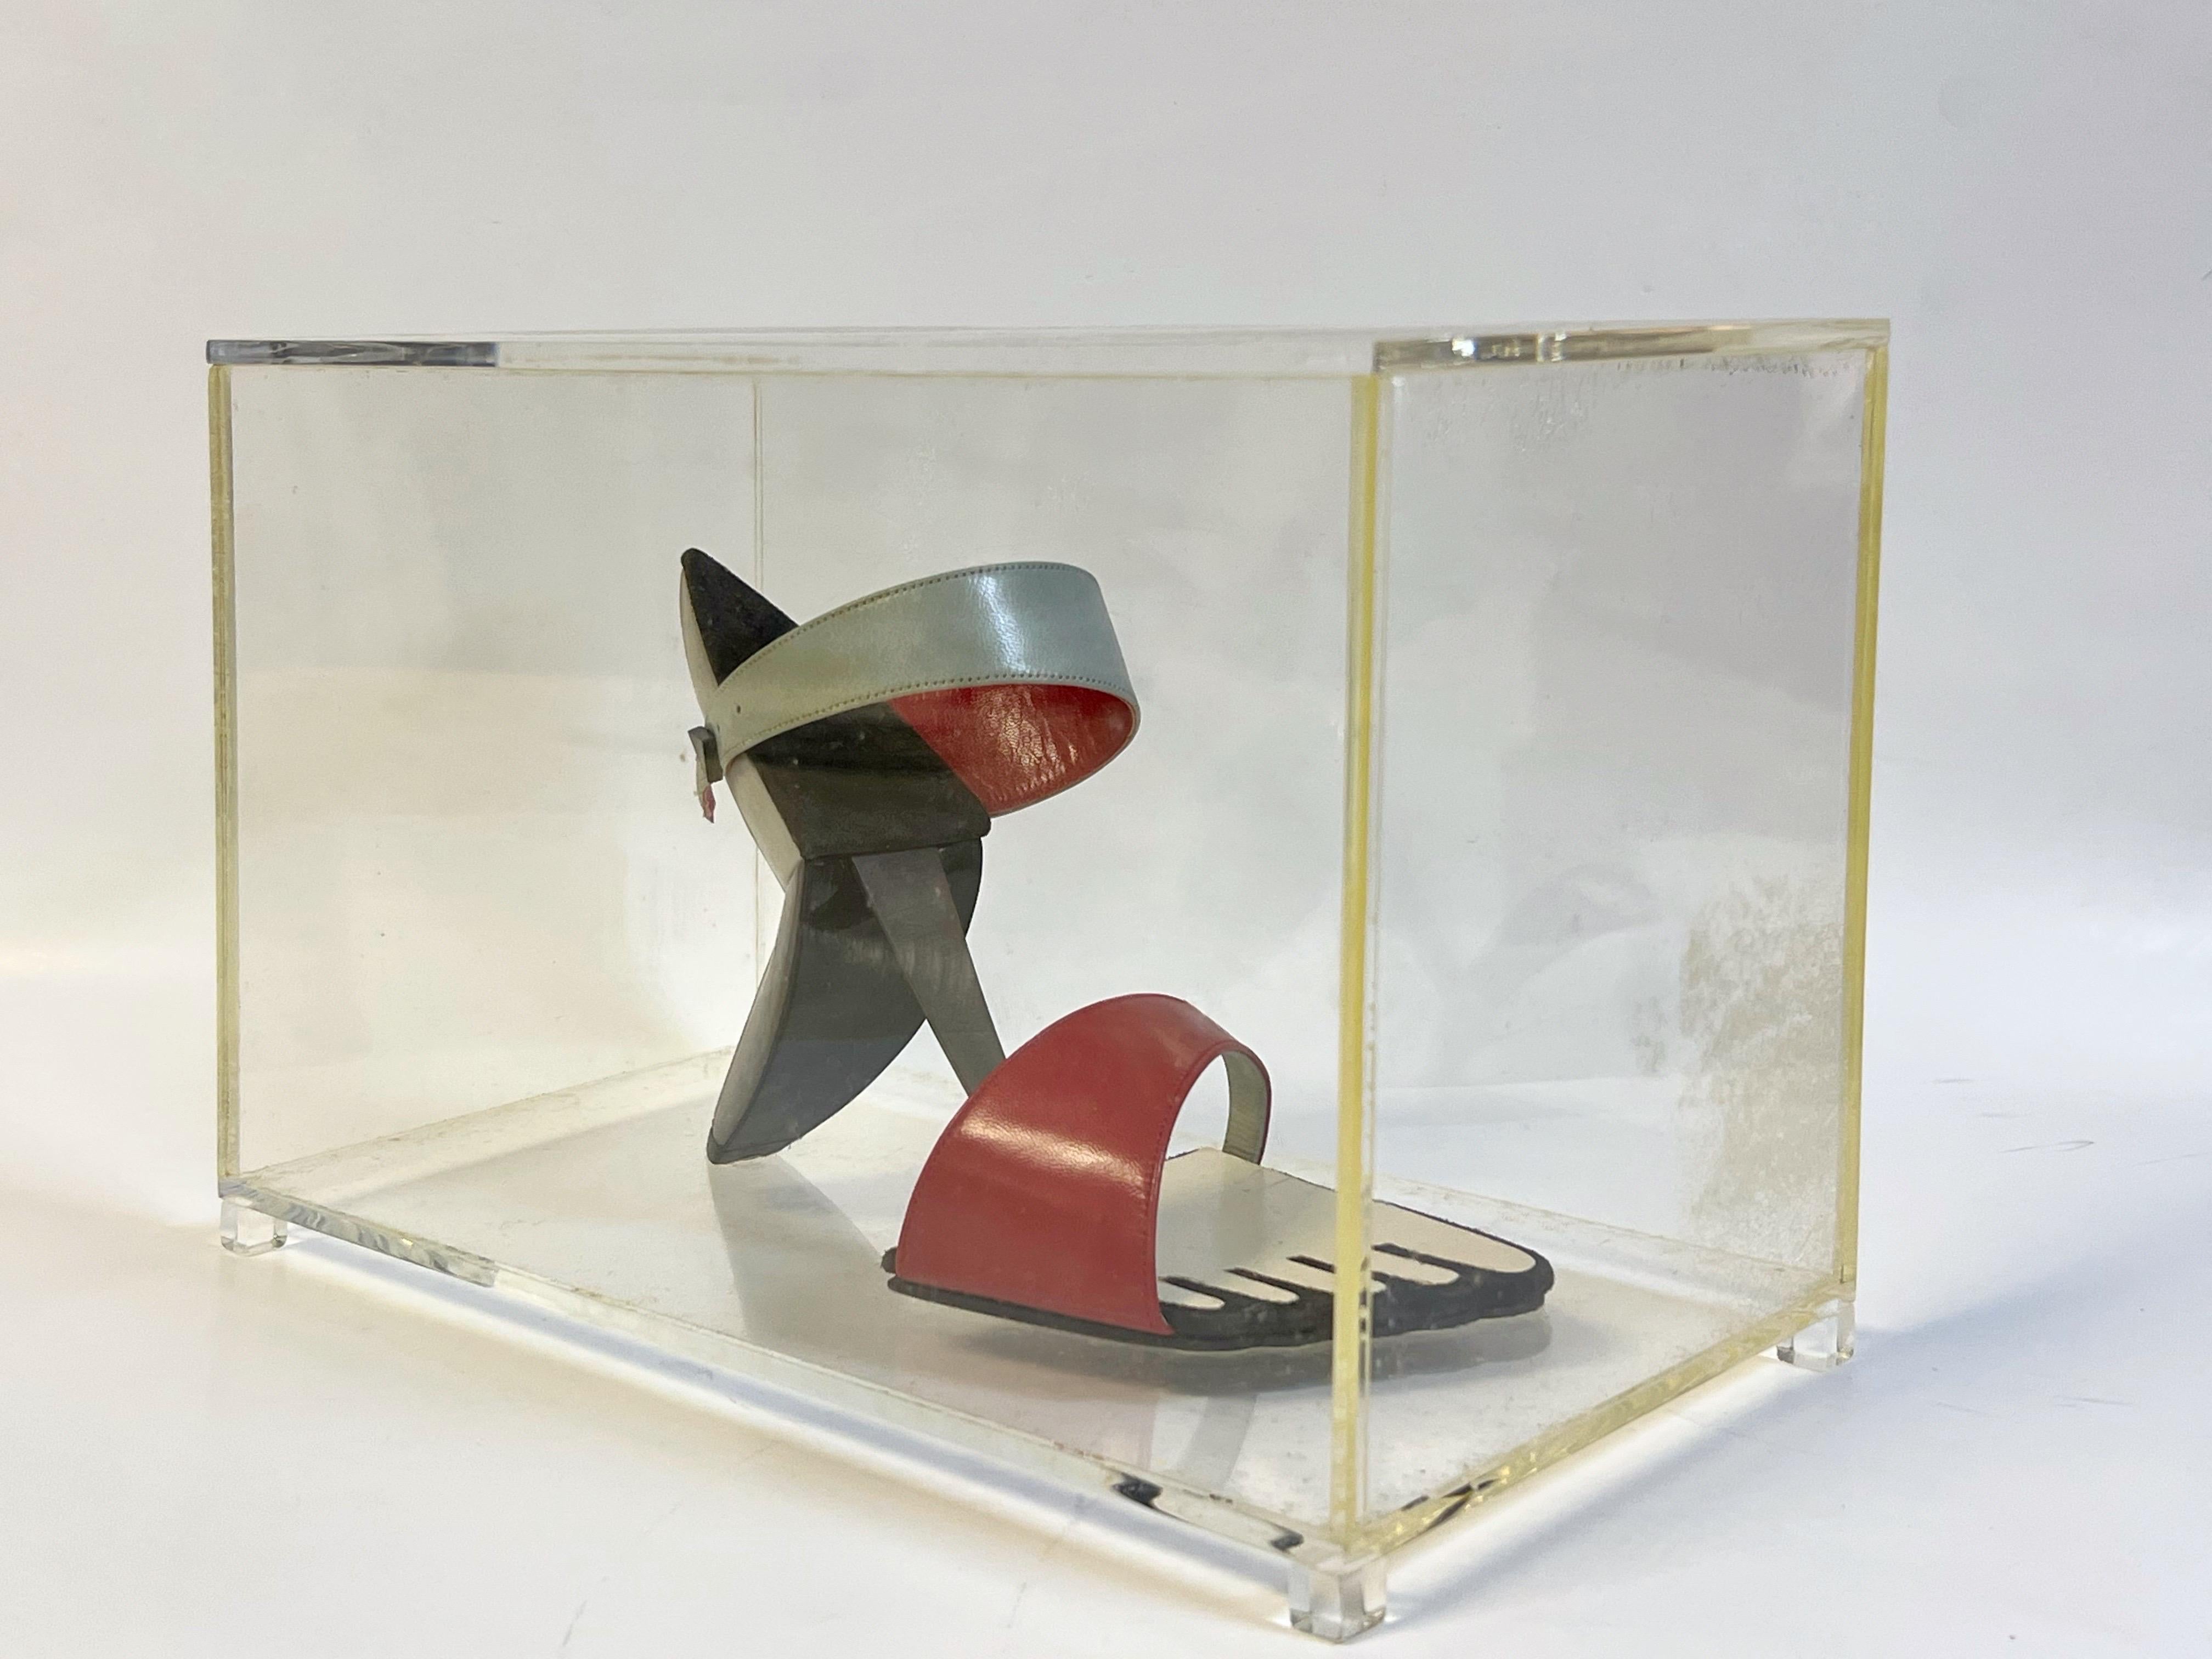 Leather Andre Perugia Charles Jourdan Cubist Picasso Shoe Sandal #28, 1984